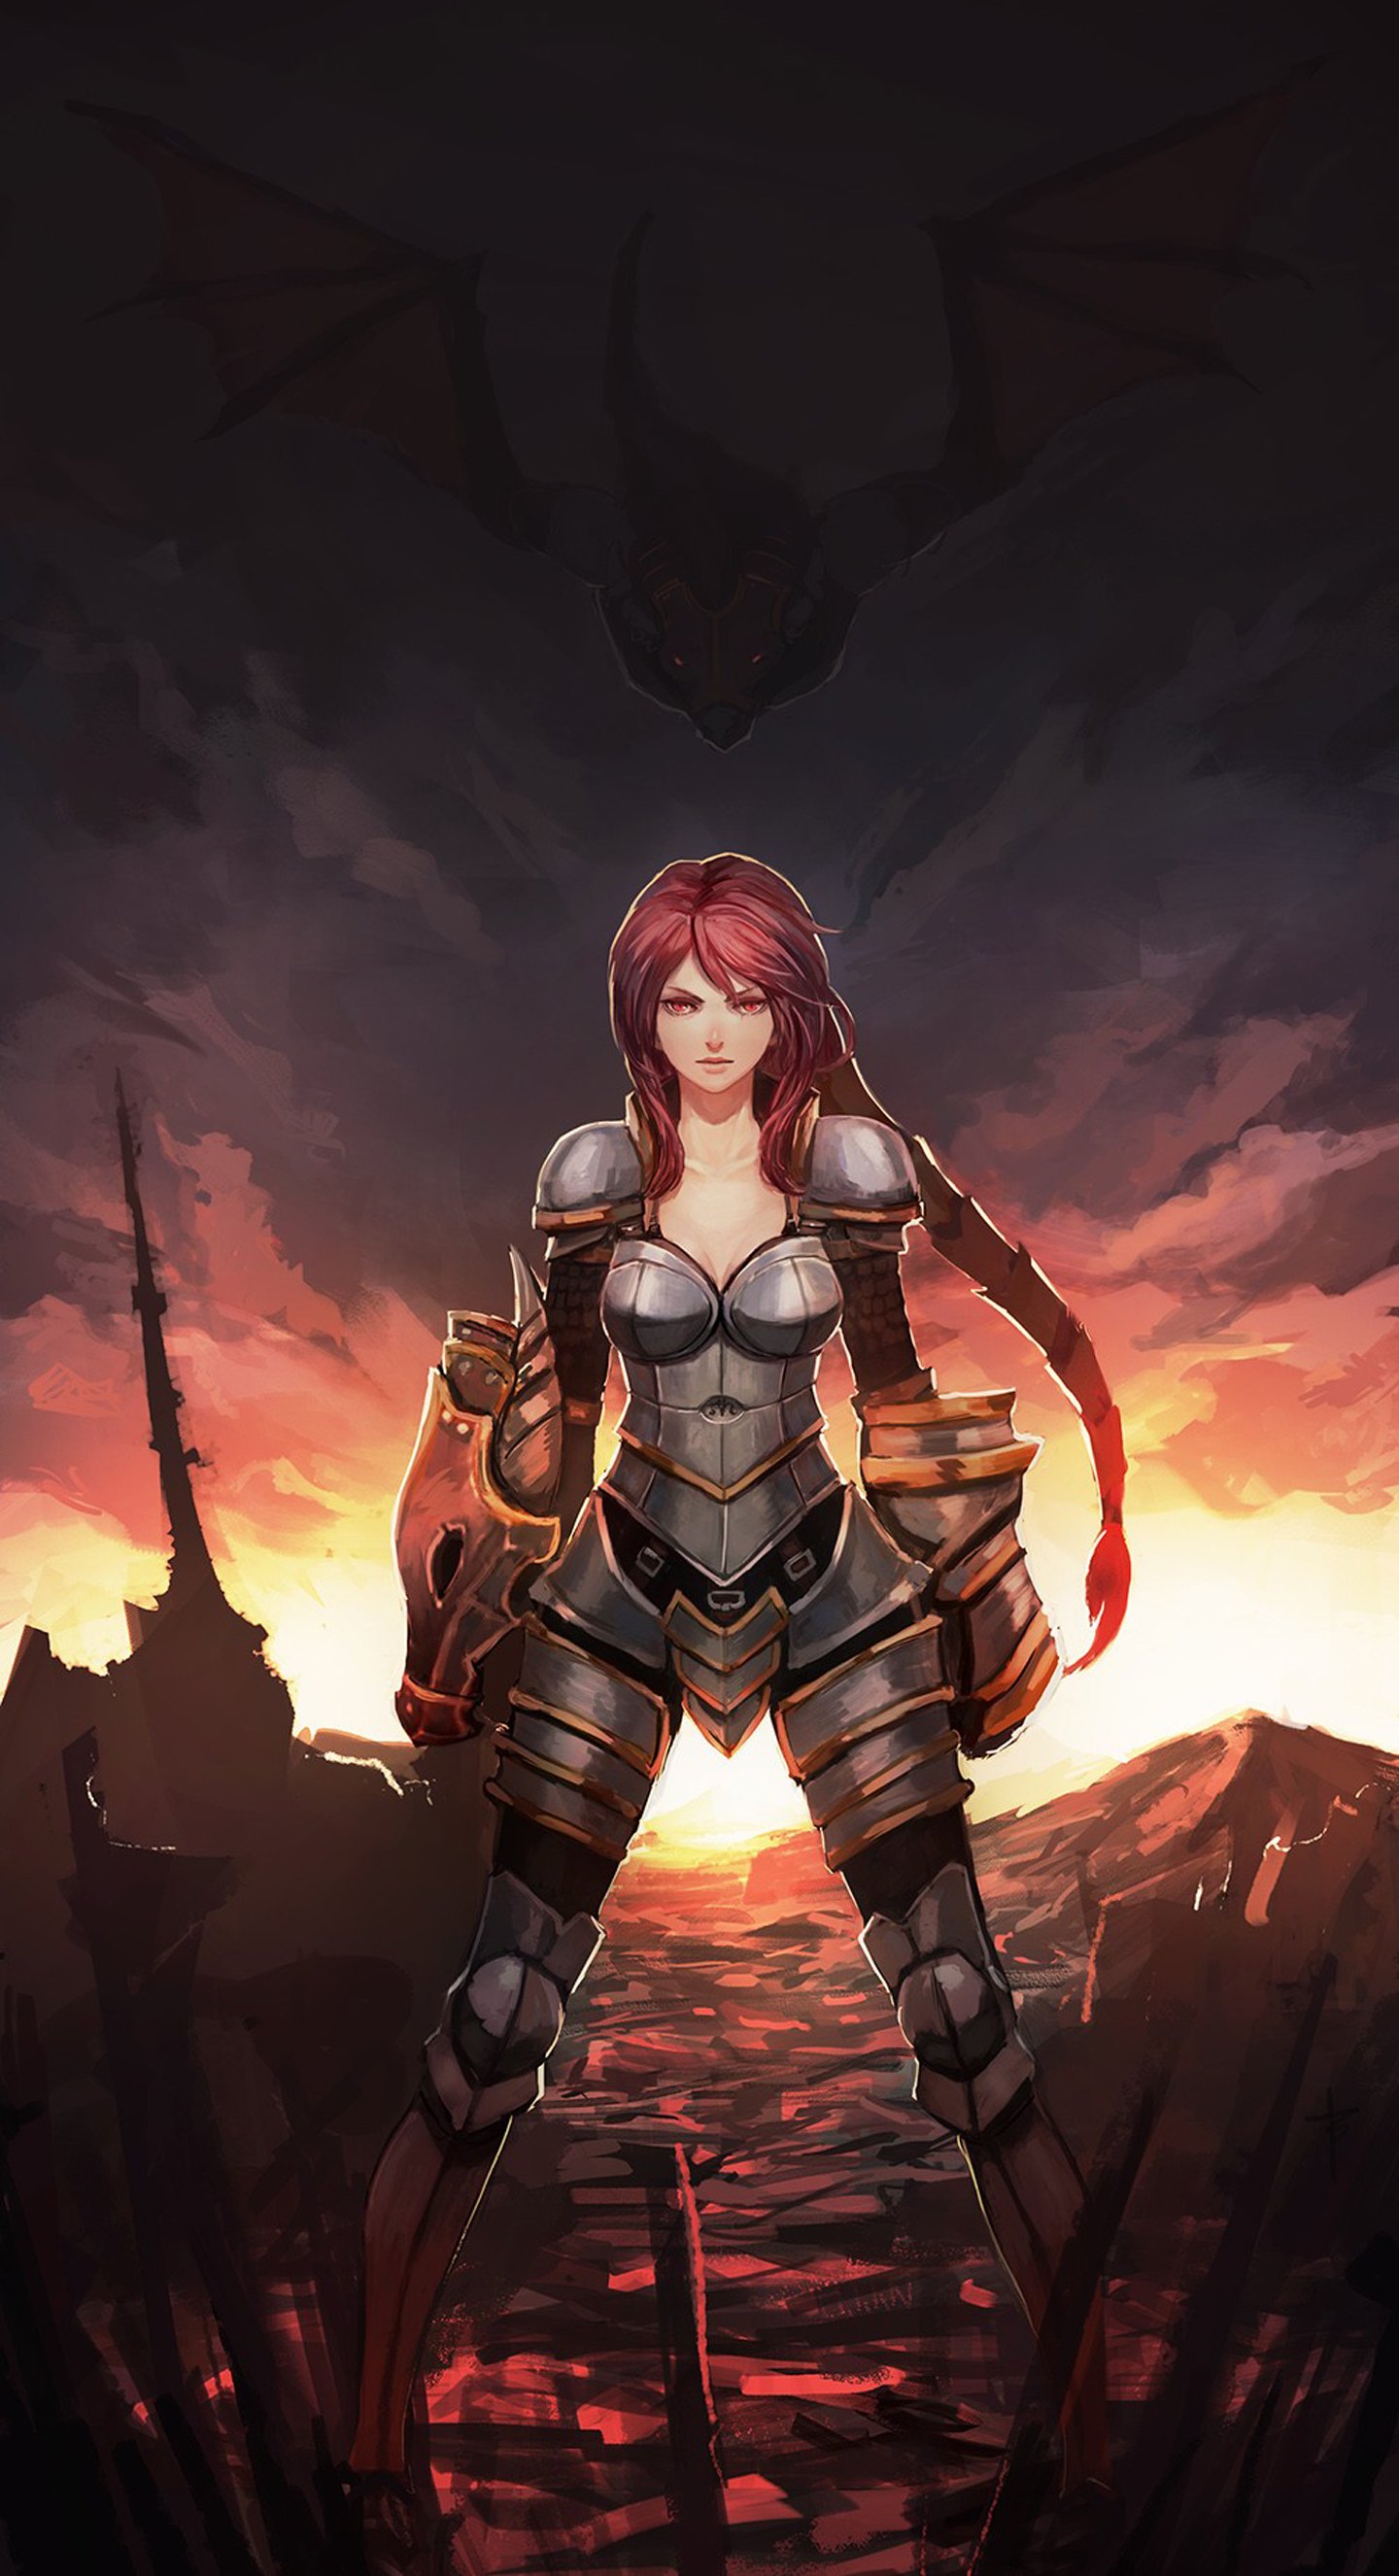 women, Video, Games, Dragons, Redheads, League, Of, Legends, Armor, Red, Eyes, Shyvana Wallpaper